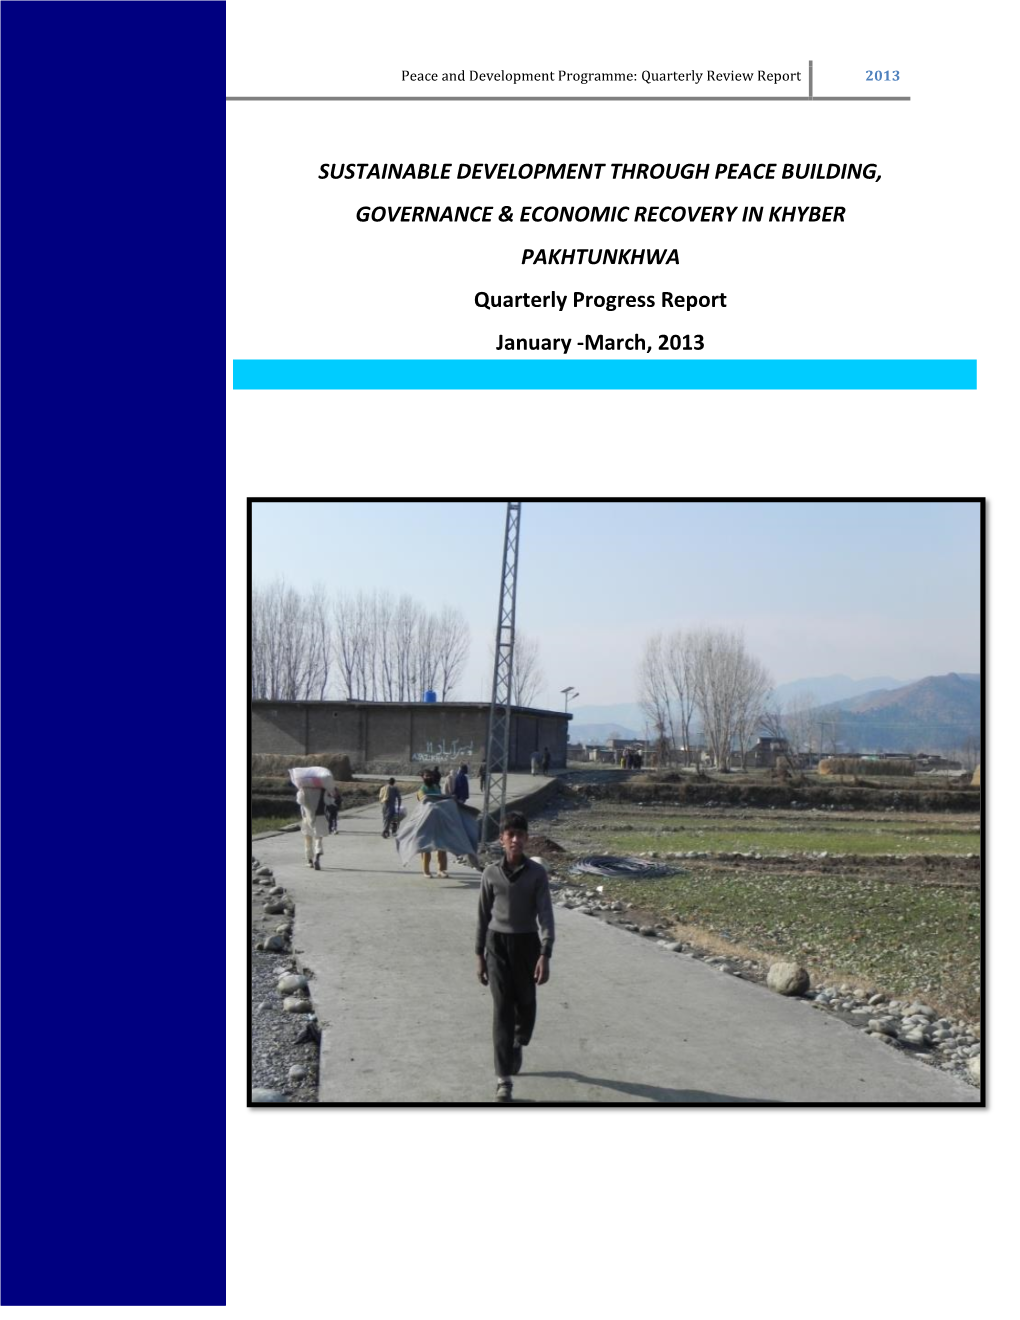 SUSTAINABLE DEVELOPMENT THROUGH PEACE BUILDING, GOVERNANCE & ECONOMIC RECOVERY in KHYBER PAKHTUNKHWA Quarterly Progress Report January -March, 2013